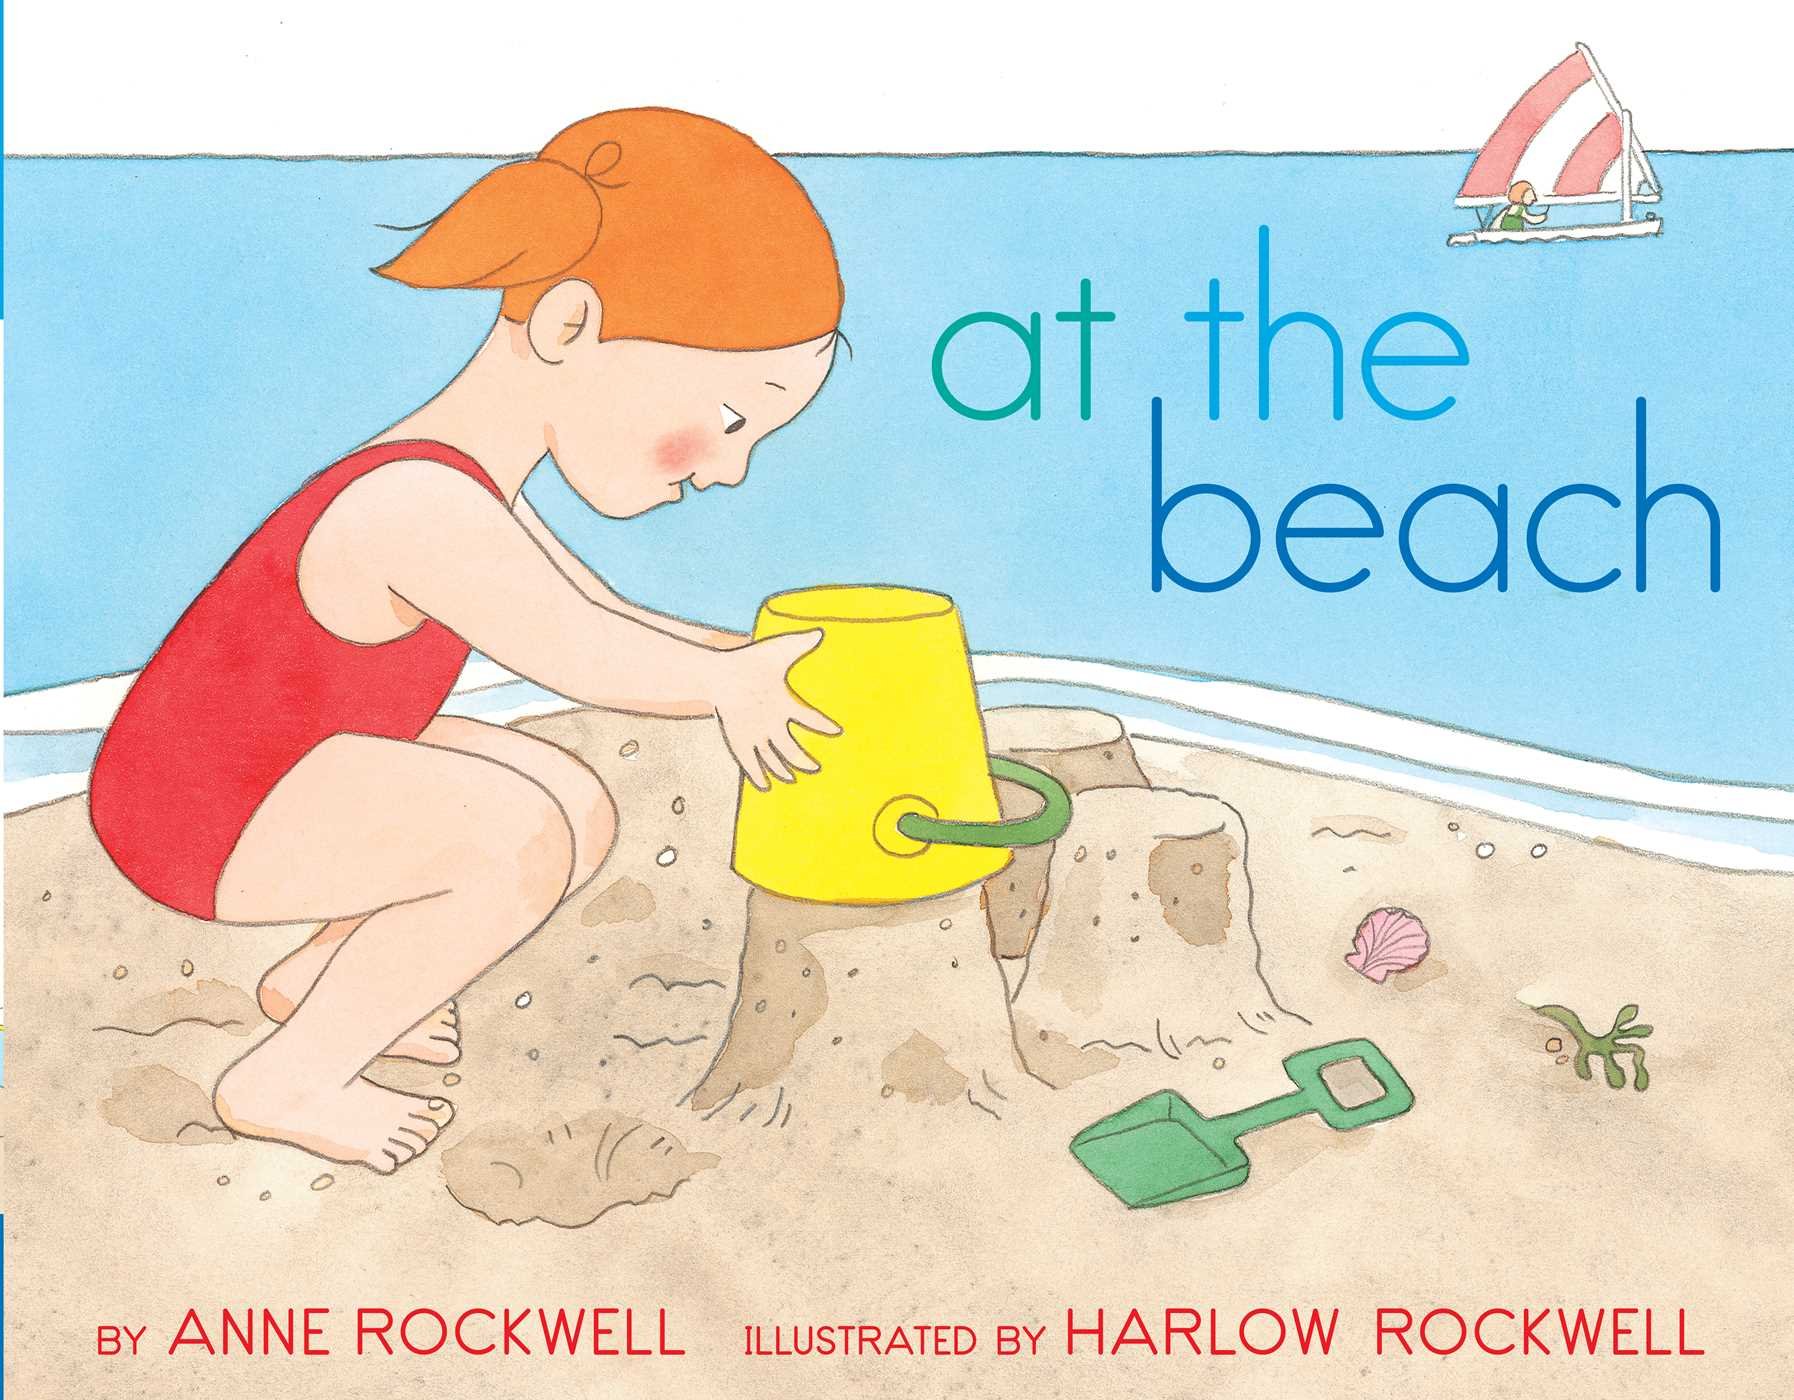 speech and language teaching concepts for At the Beach in speech therapy